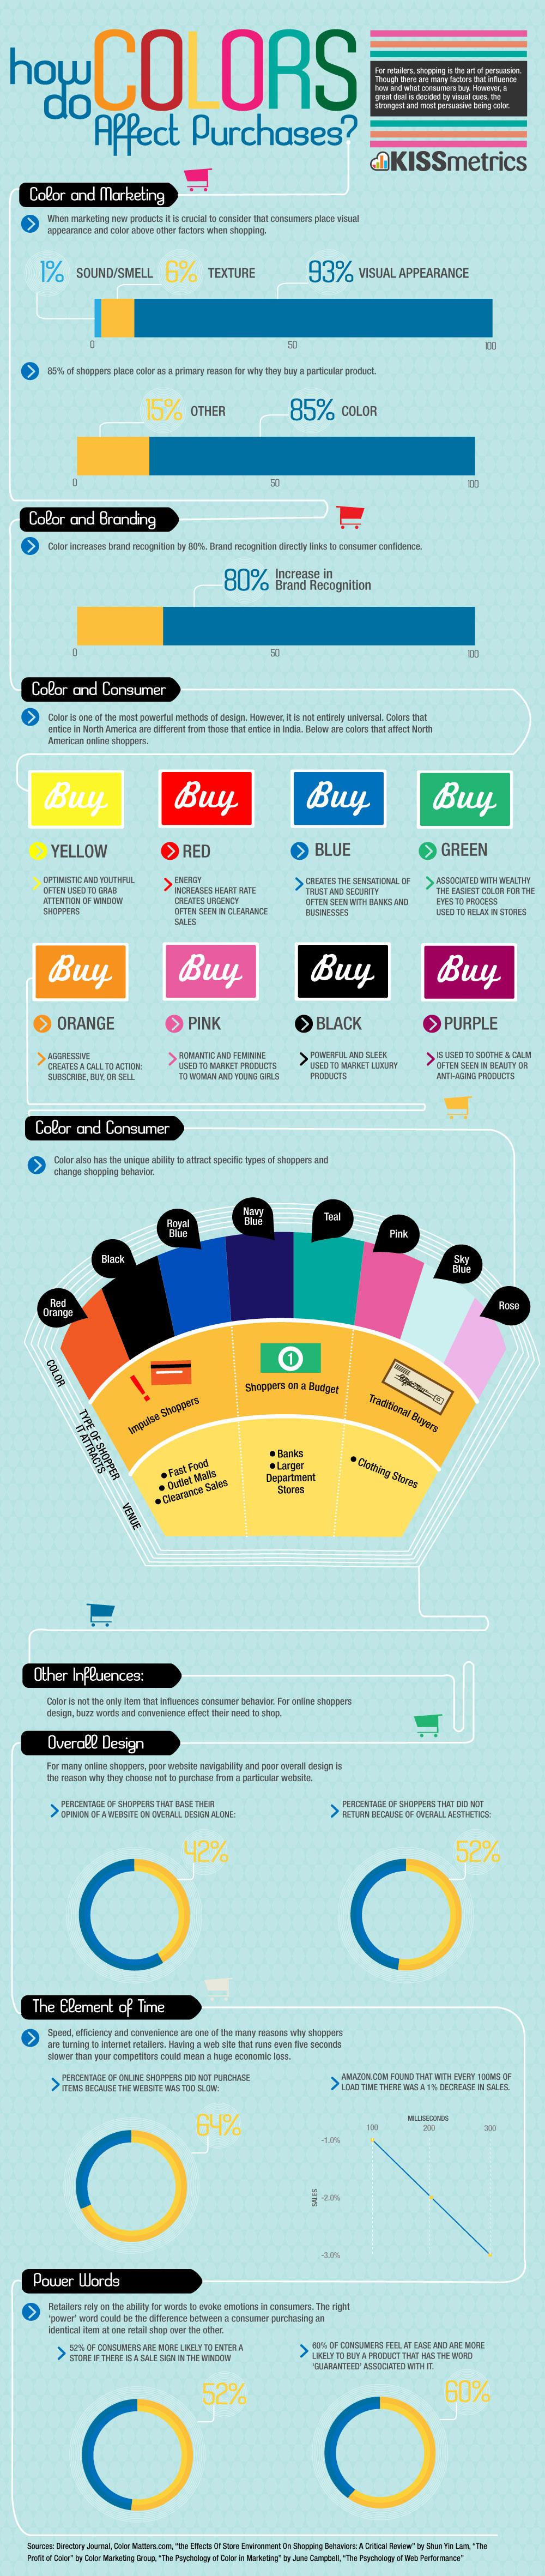 How To Choose The Right Colors For Branding